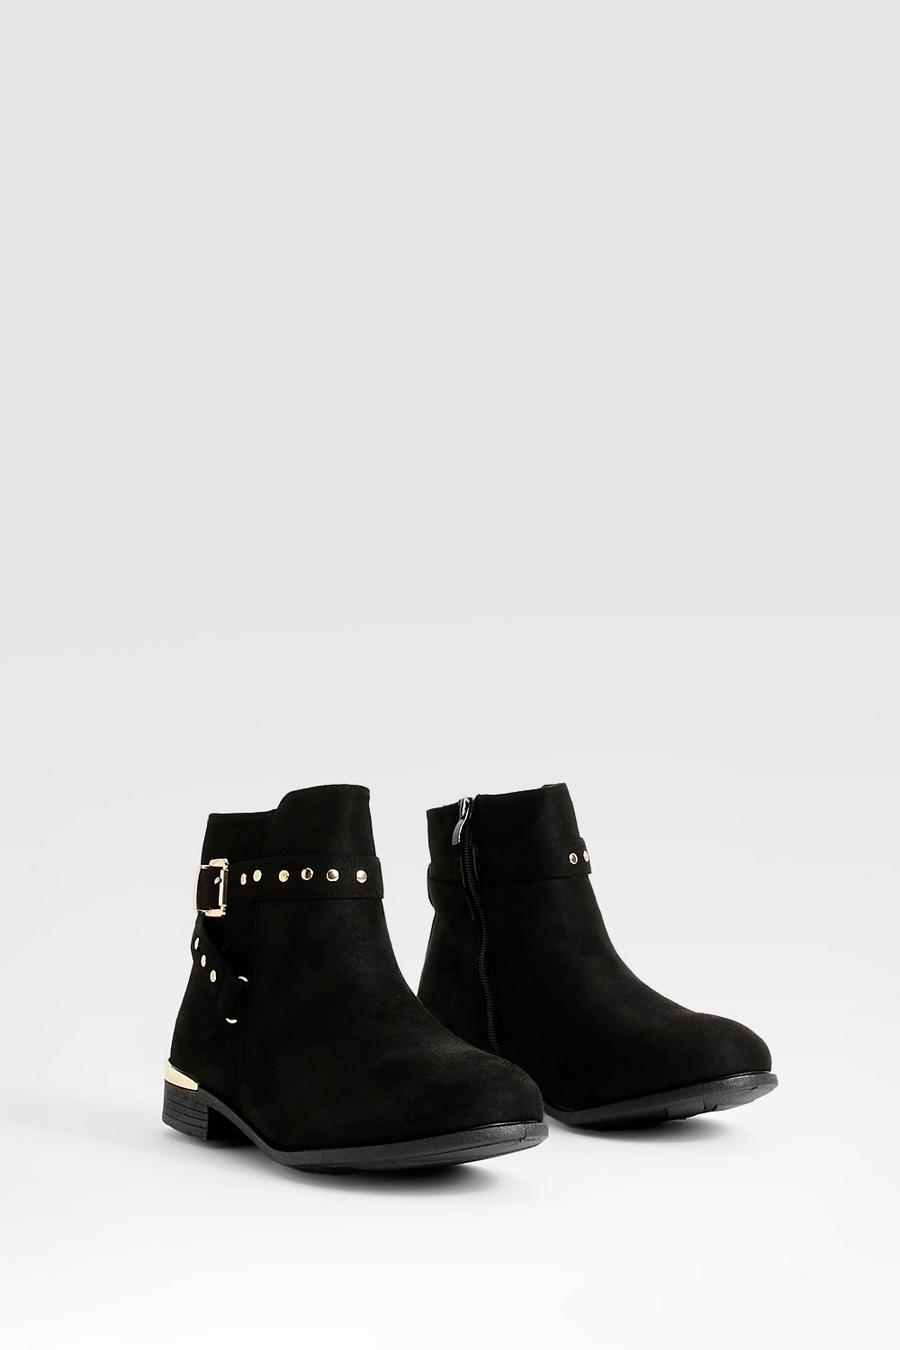 Wide Width Black Buckle Detail Patent Micro Ankle Boot